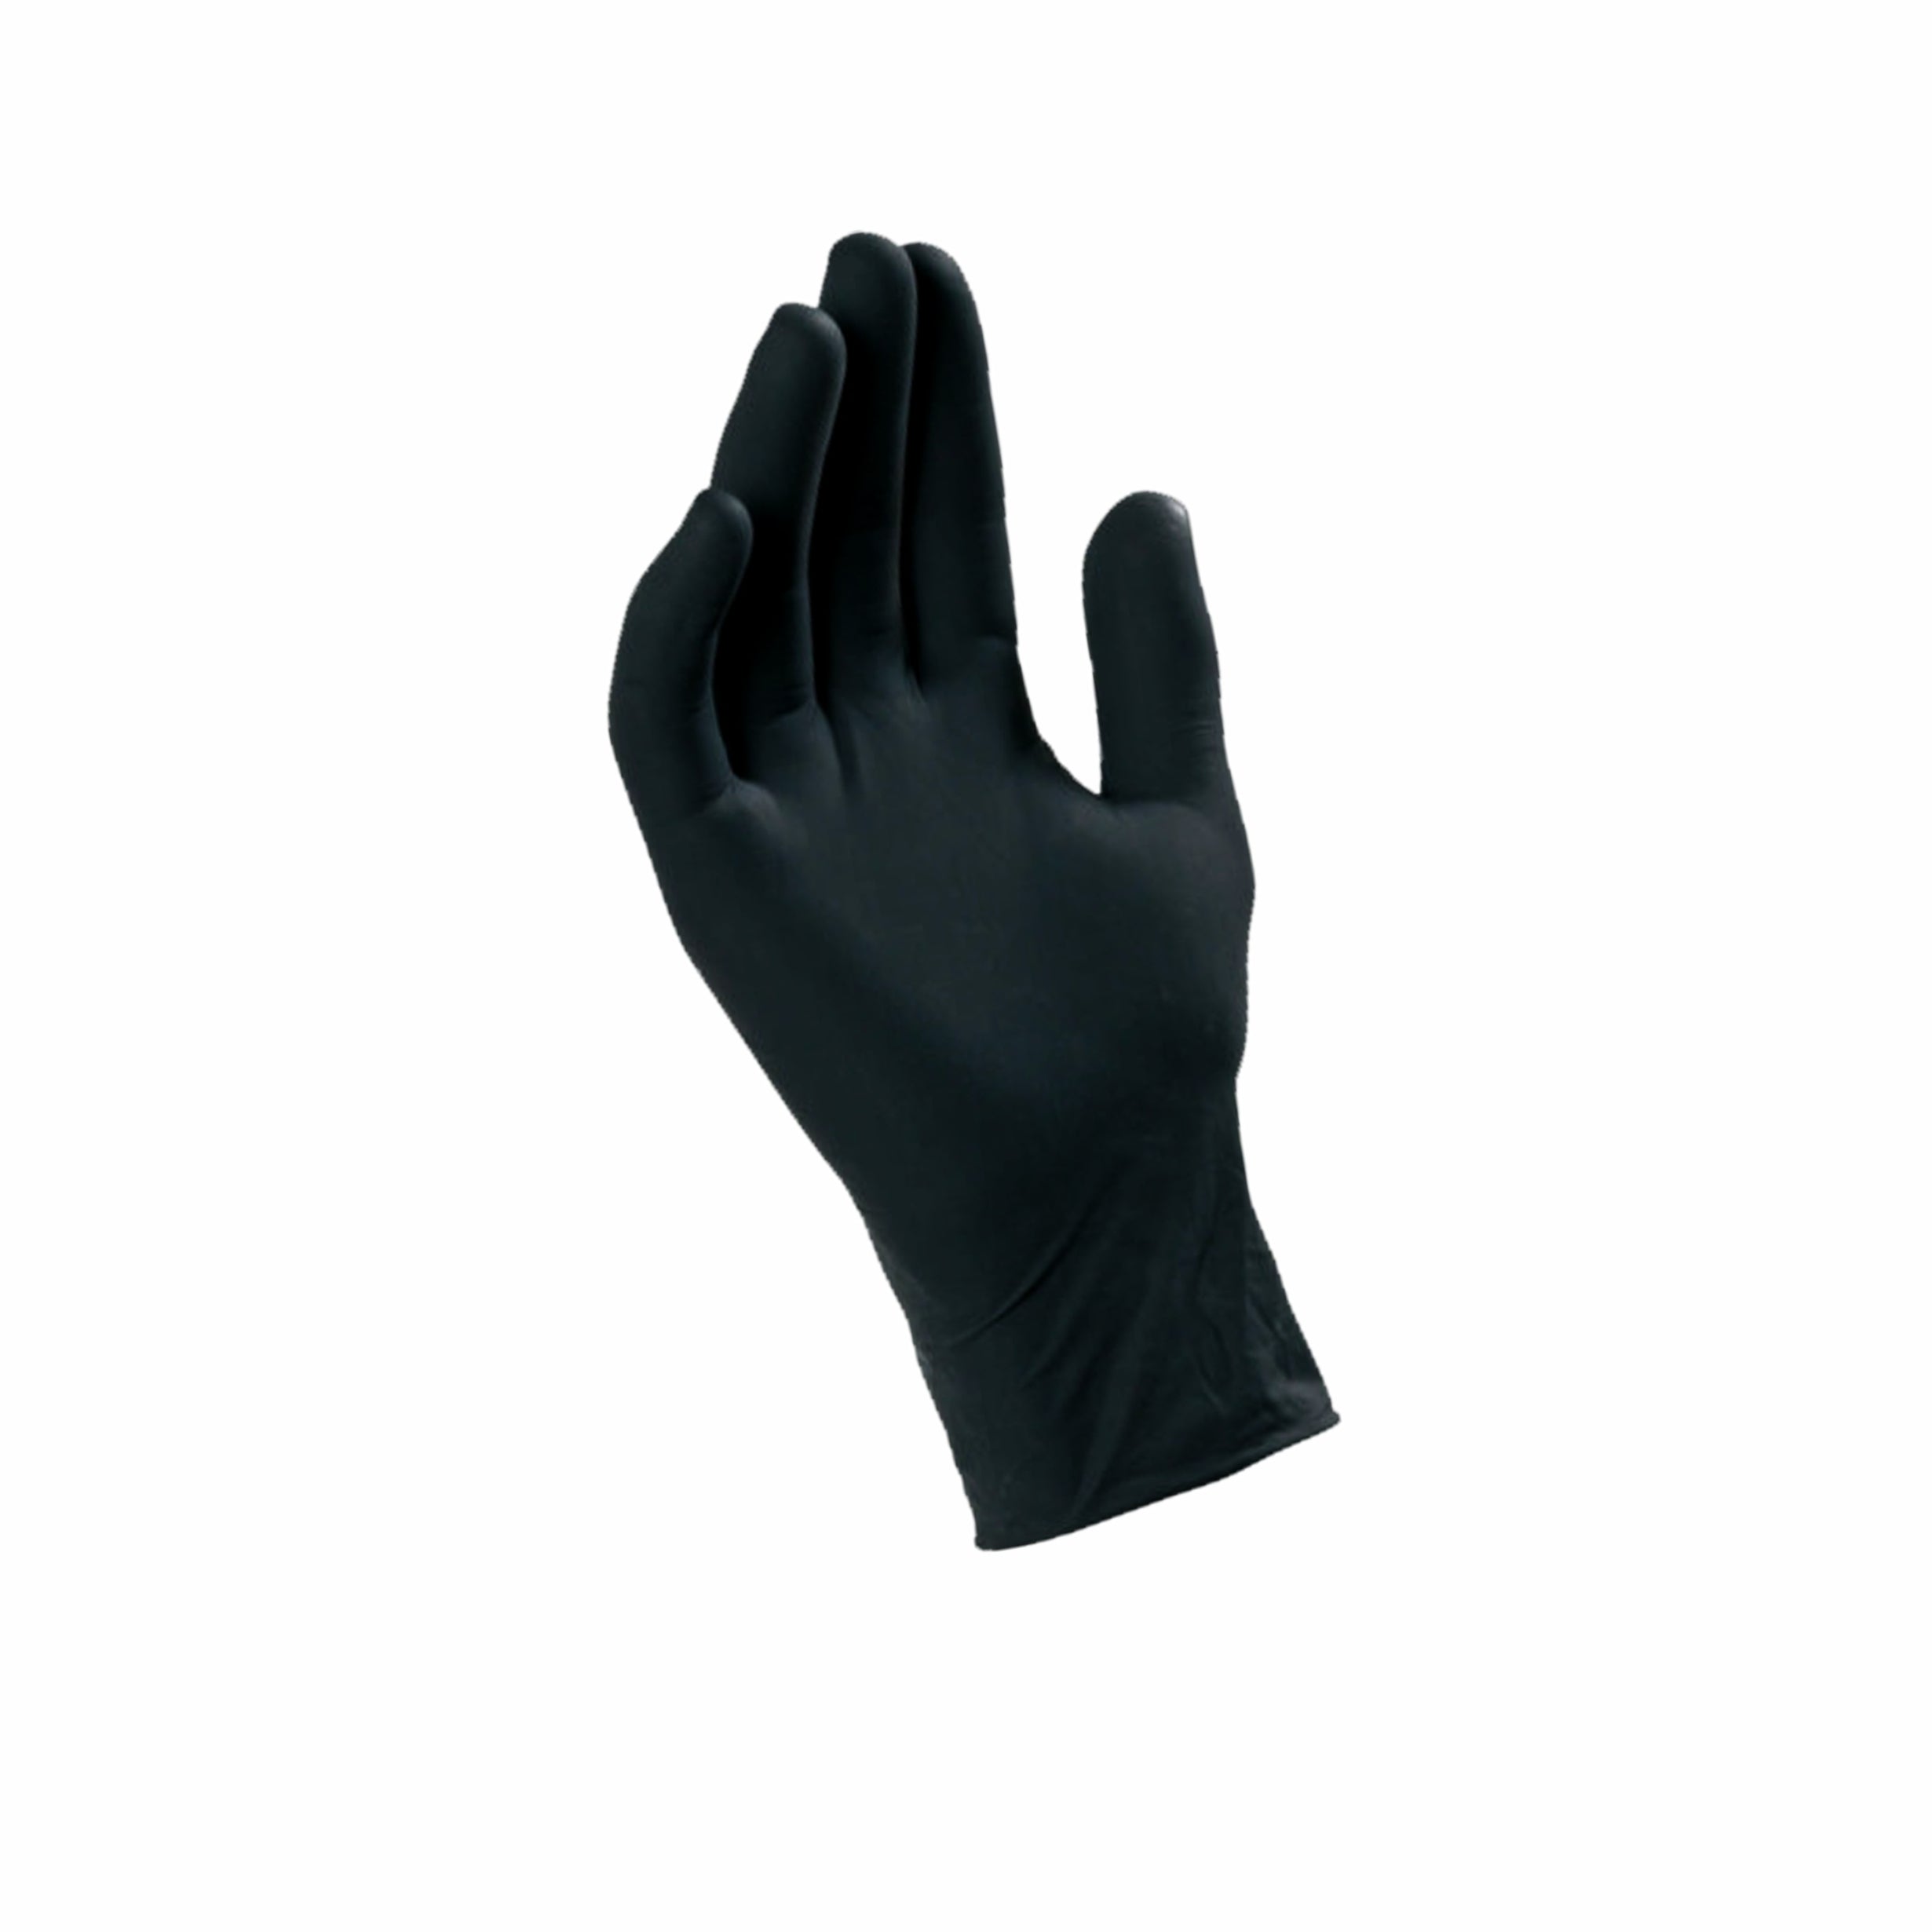 Guanti monouso in nitrile nero Onyx new Med